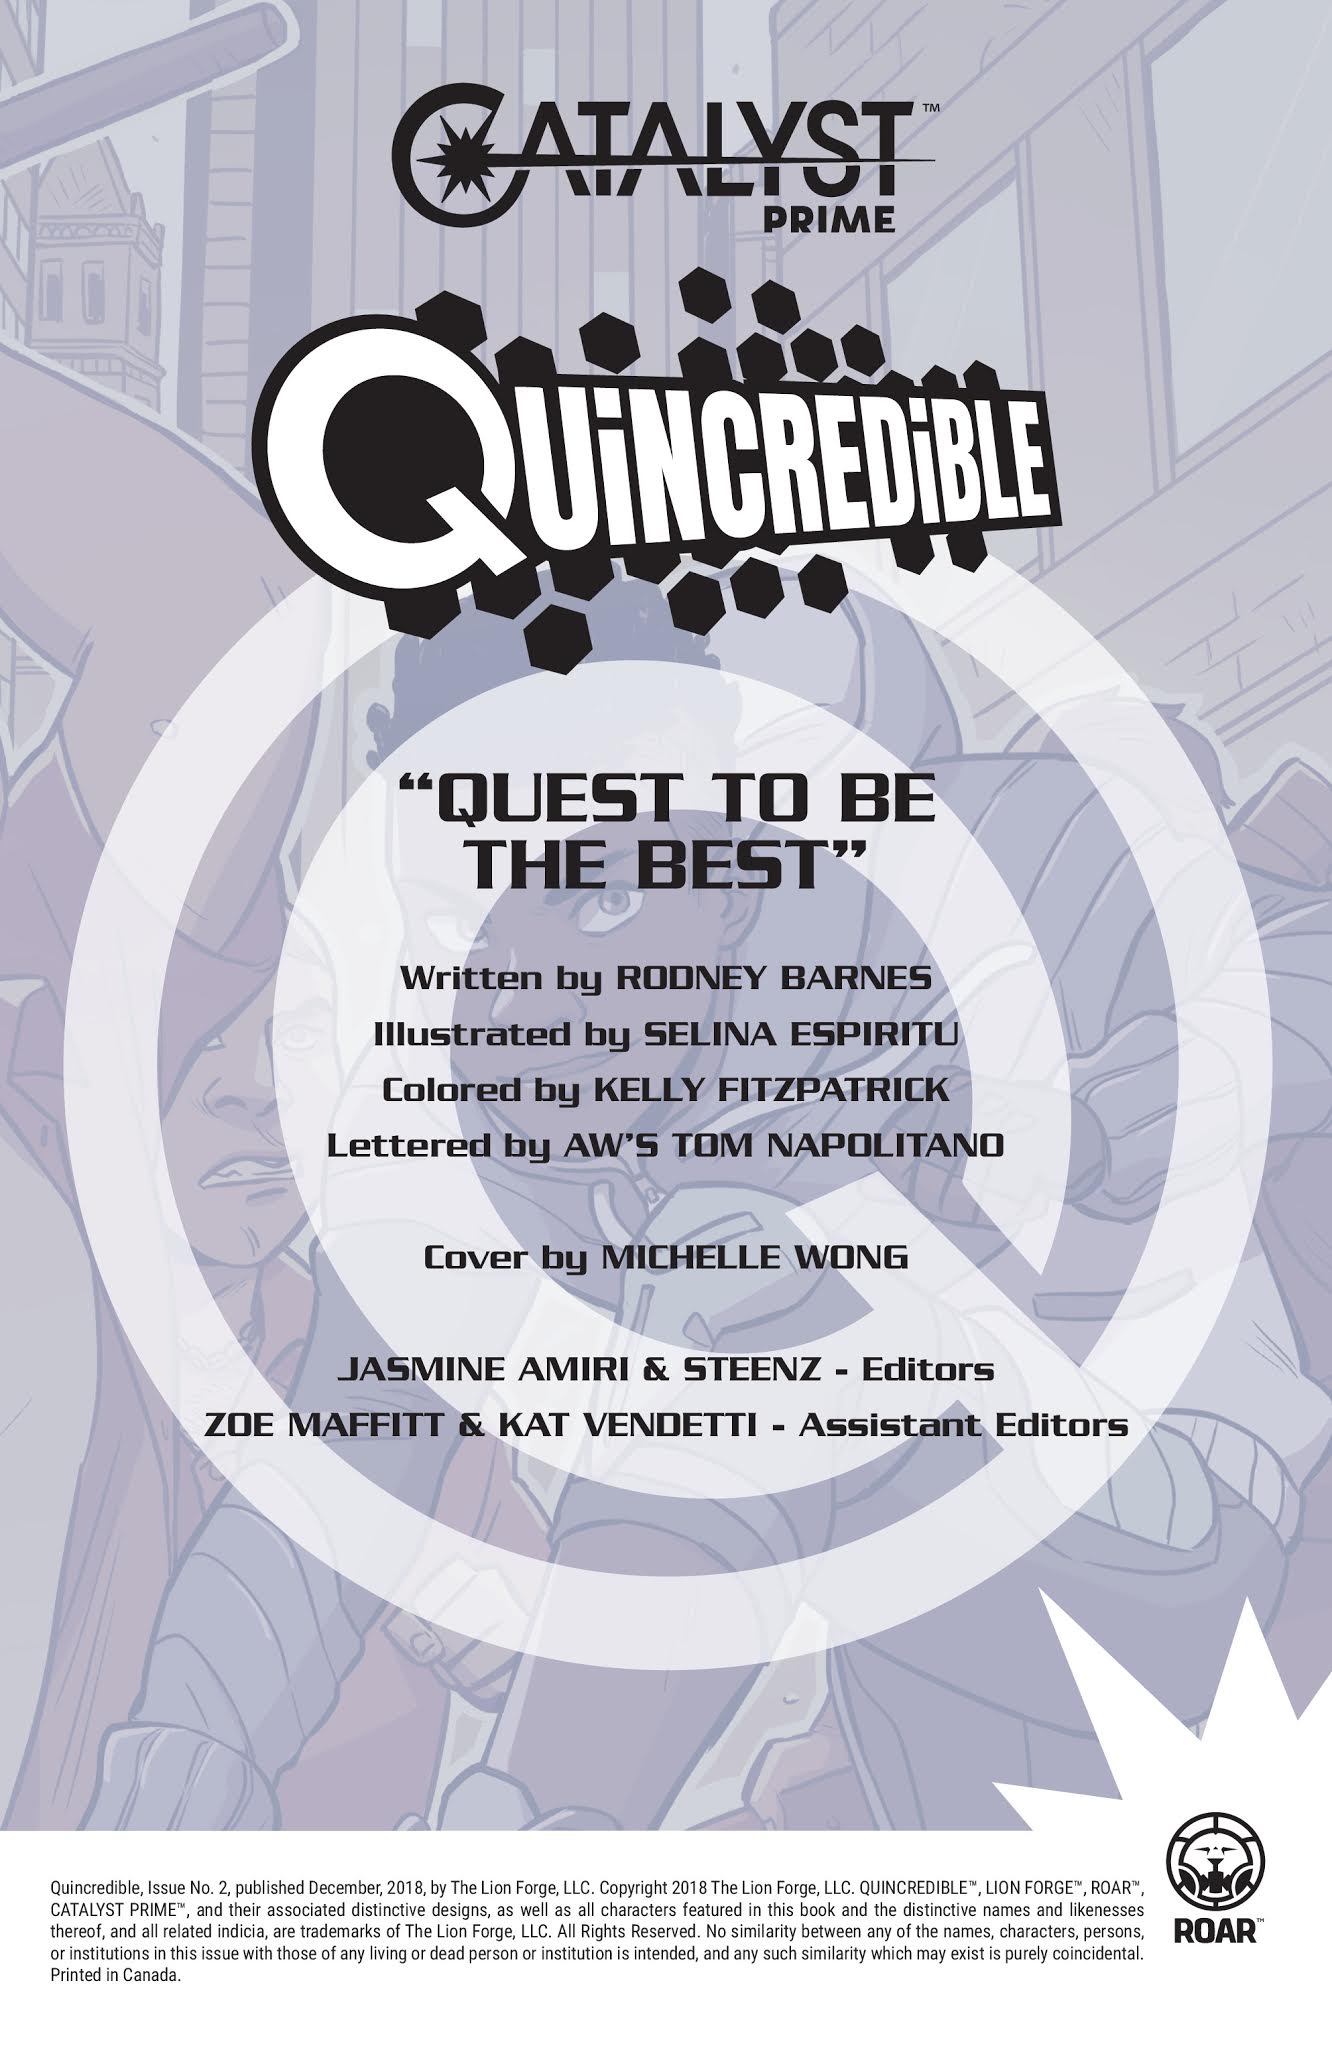 Read online Quincredible comic -  Issue #2 - 2